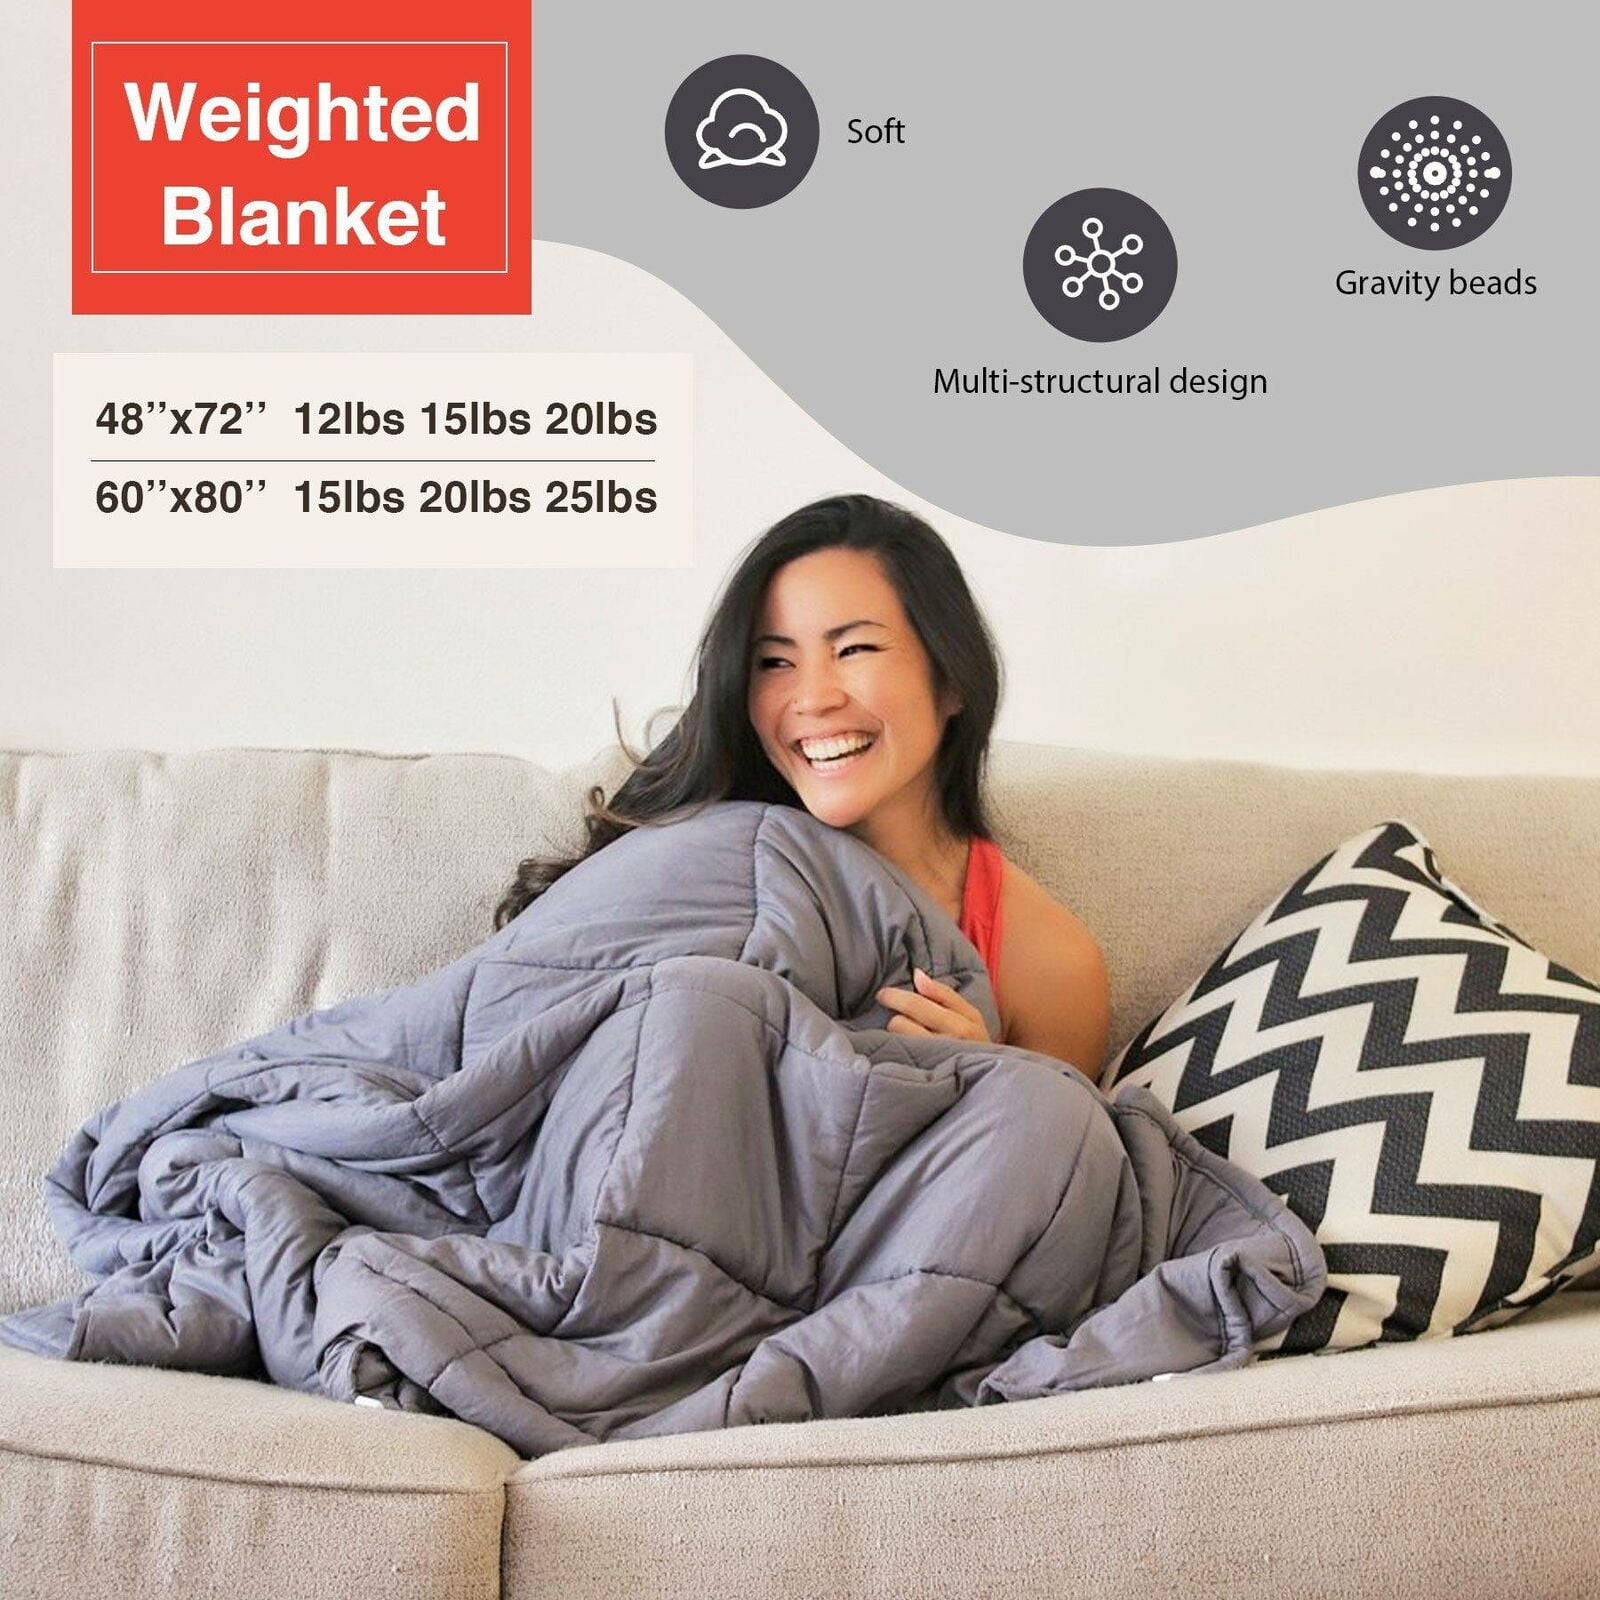 LANGRIA Weighted Blanket for Kids Washable Heavy Blanket for Bed Sofa 5 lbs, 36x48 Soft Breathable Cotton Fabric with Odorless Glass Beads Cool Heavy Blanket for Sleeping 